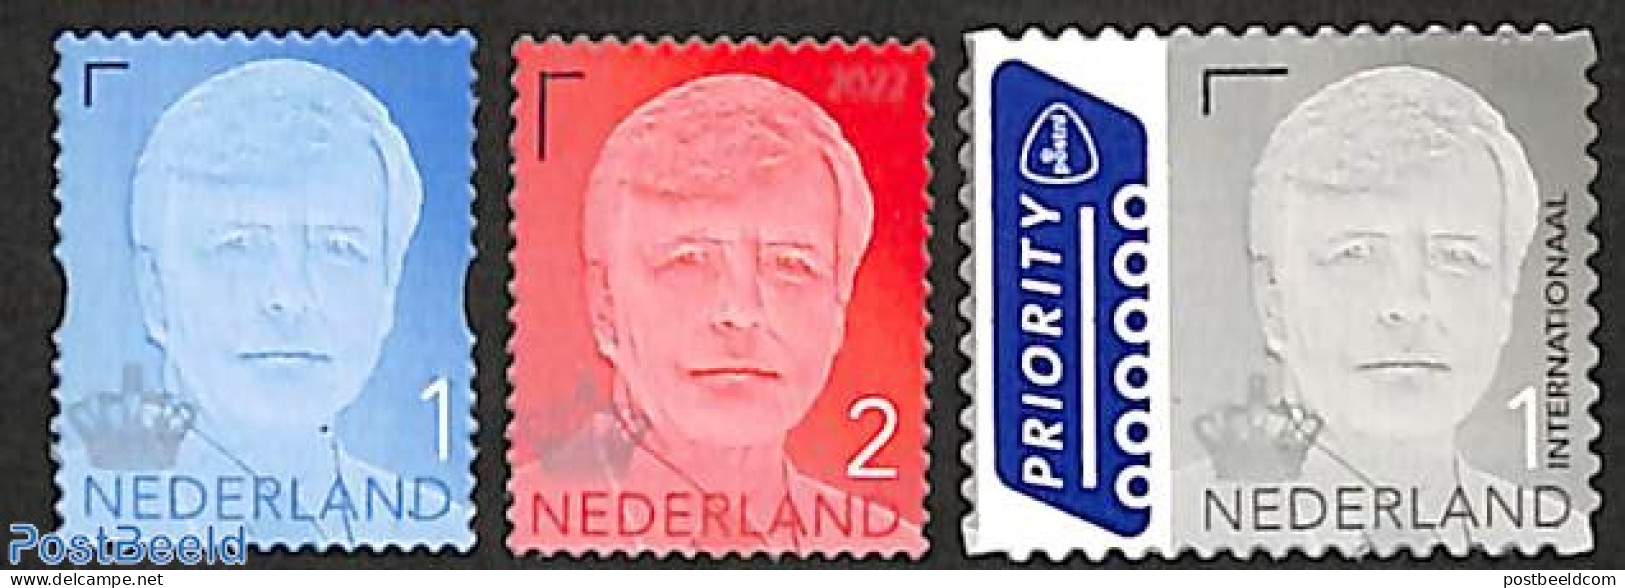 Netherlands 2022 Definitives 3v, With Year 2022, Mint NH - Unused Stamps